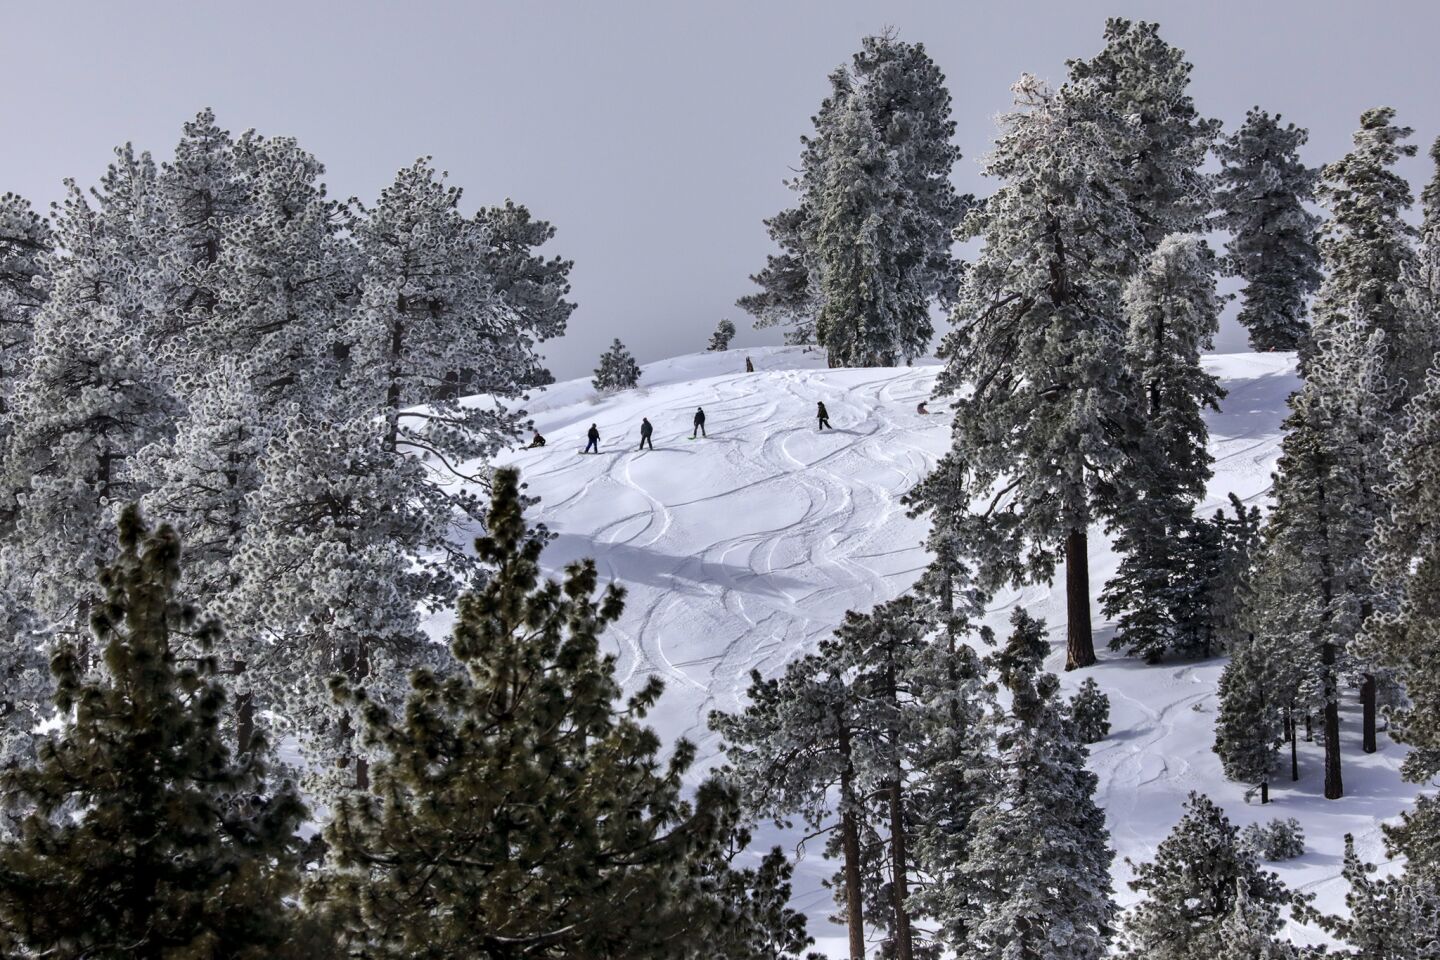 Skiers and snowboarders enjoy fresh snow Thursday at Mountain High above Wrightwood.